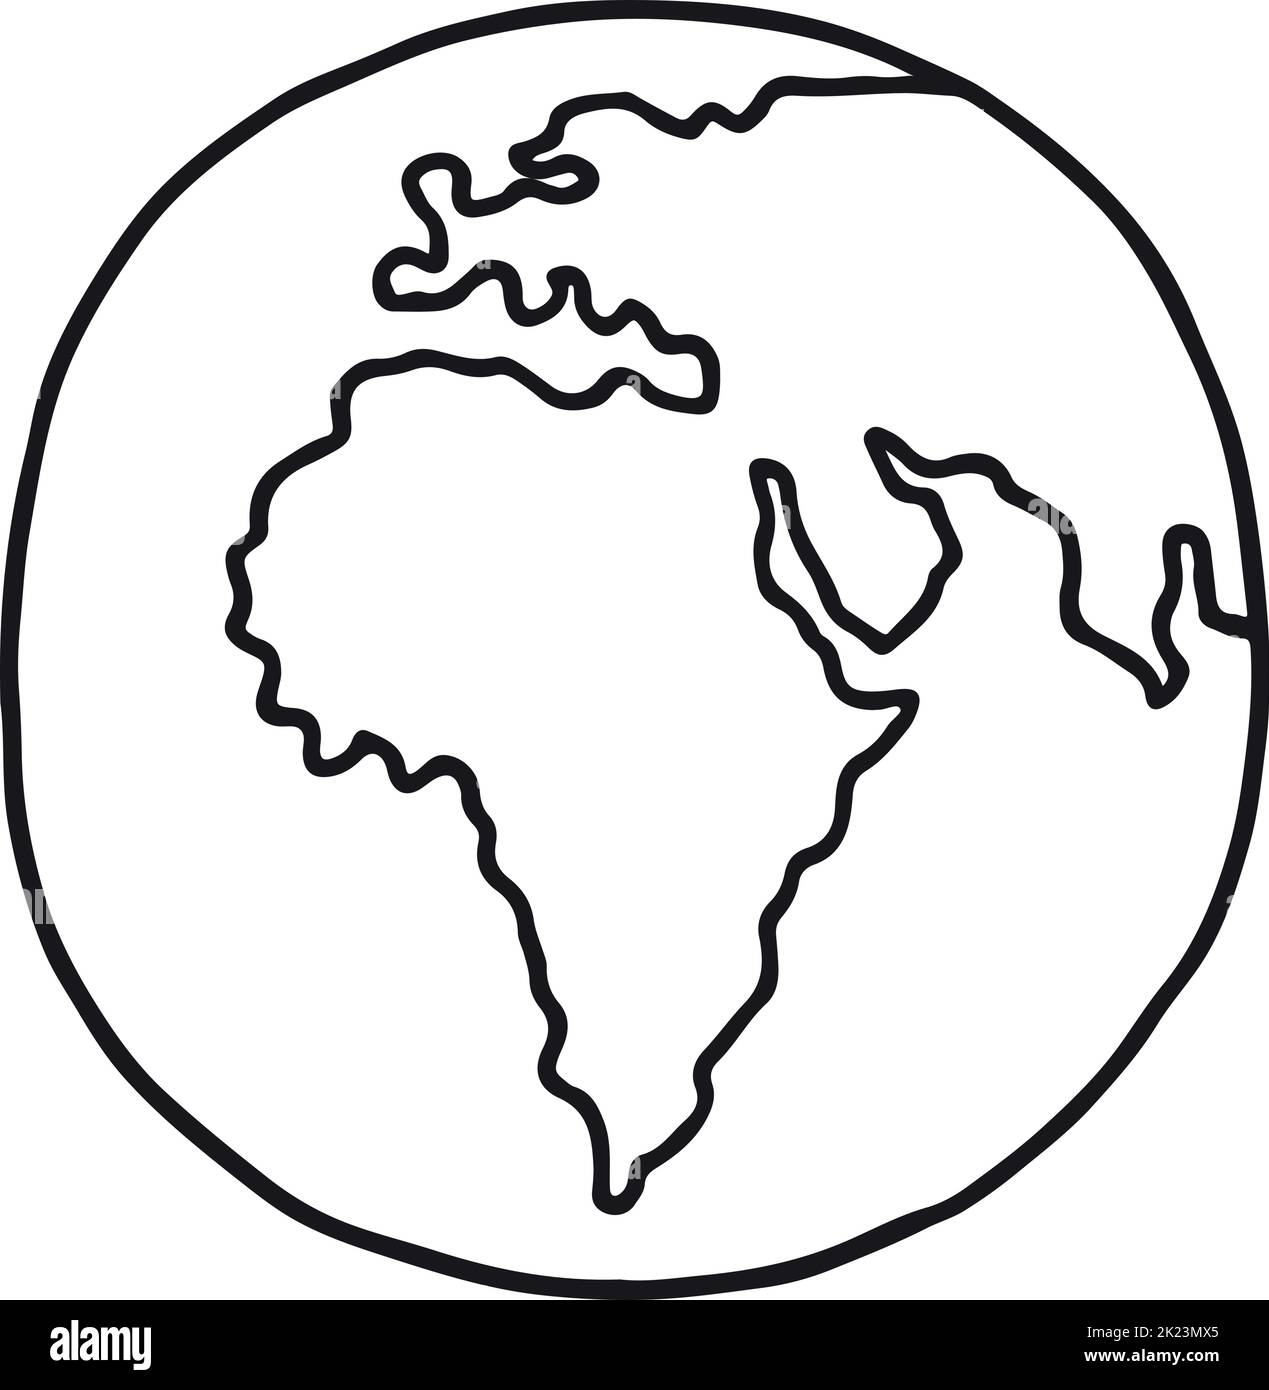 Earth doodle. Hand drawn planet. Globe sketch Stock Vector